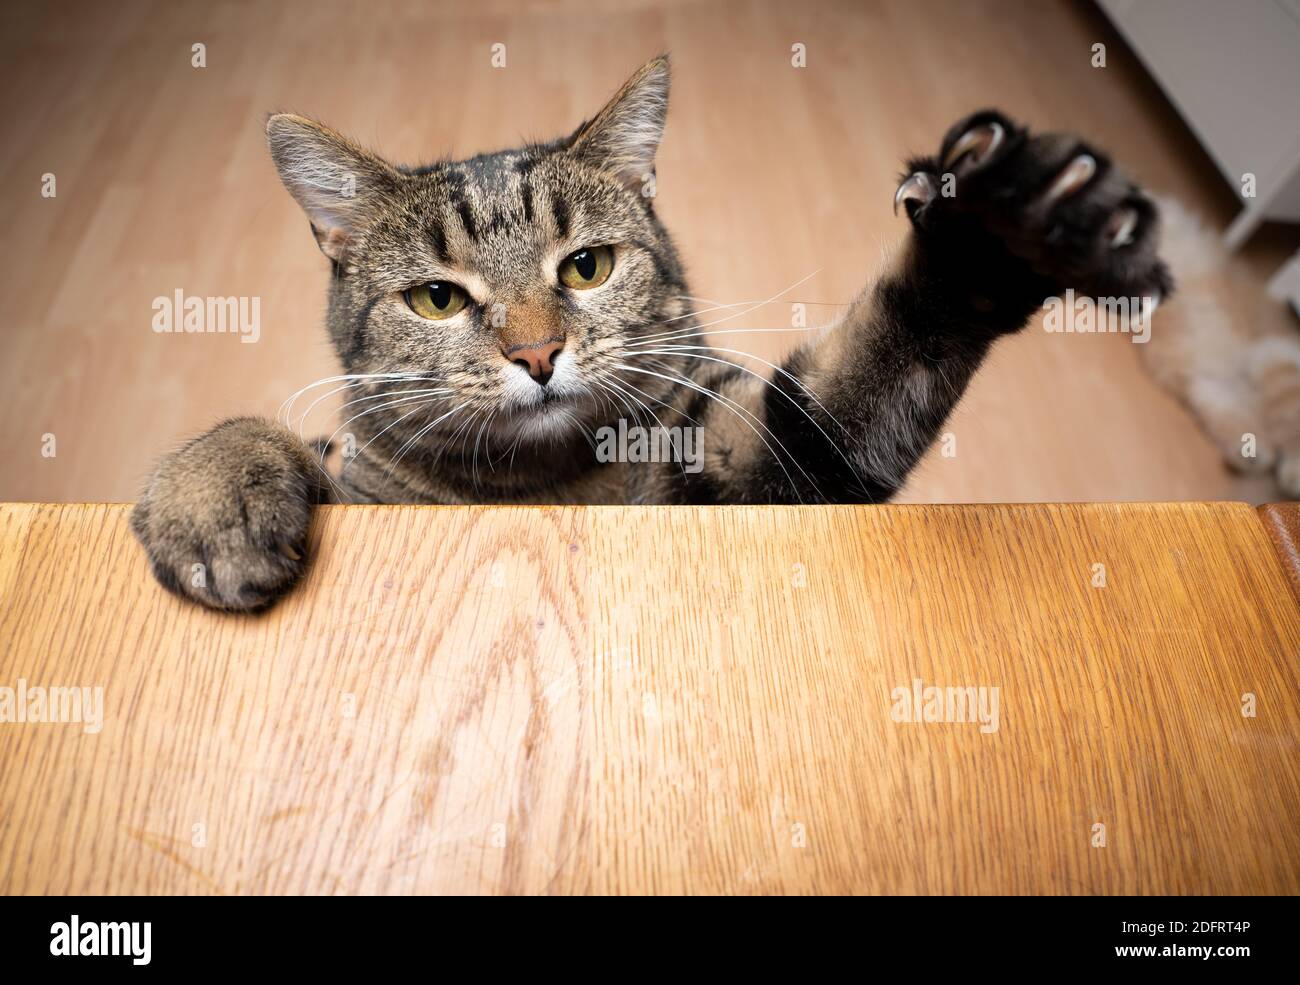 greedy tabby cat rearing up on wooden table with copy space raising paw reching for food Stock Photo